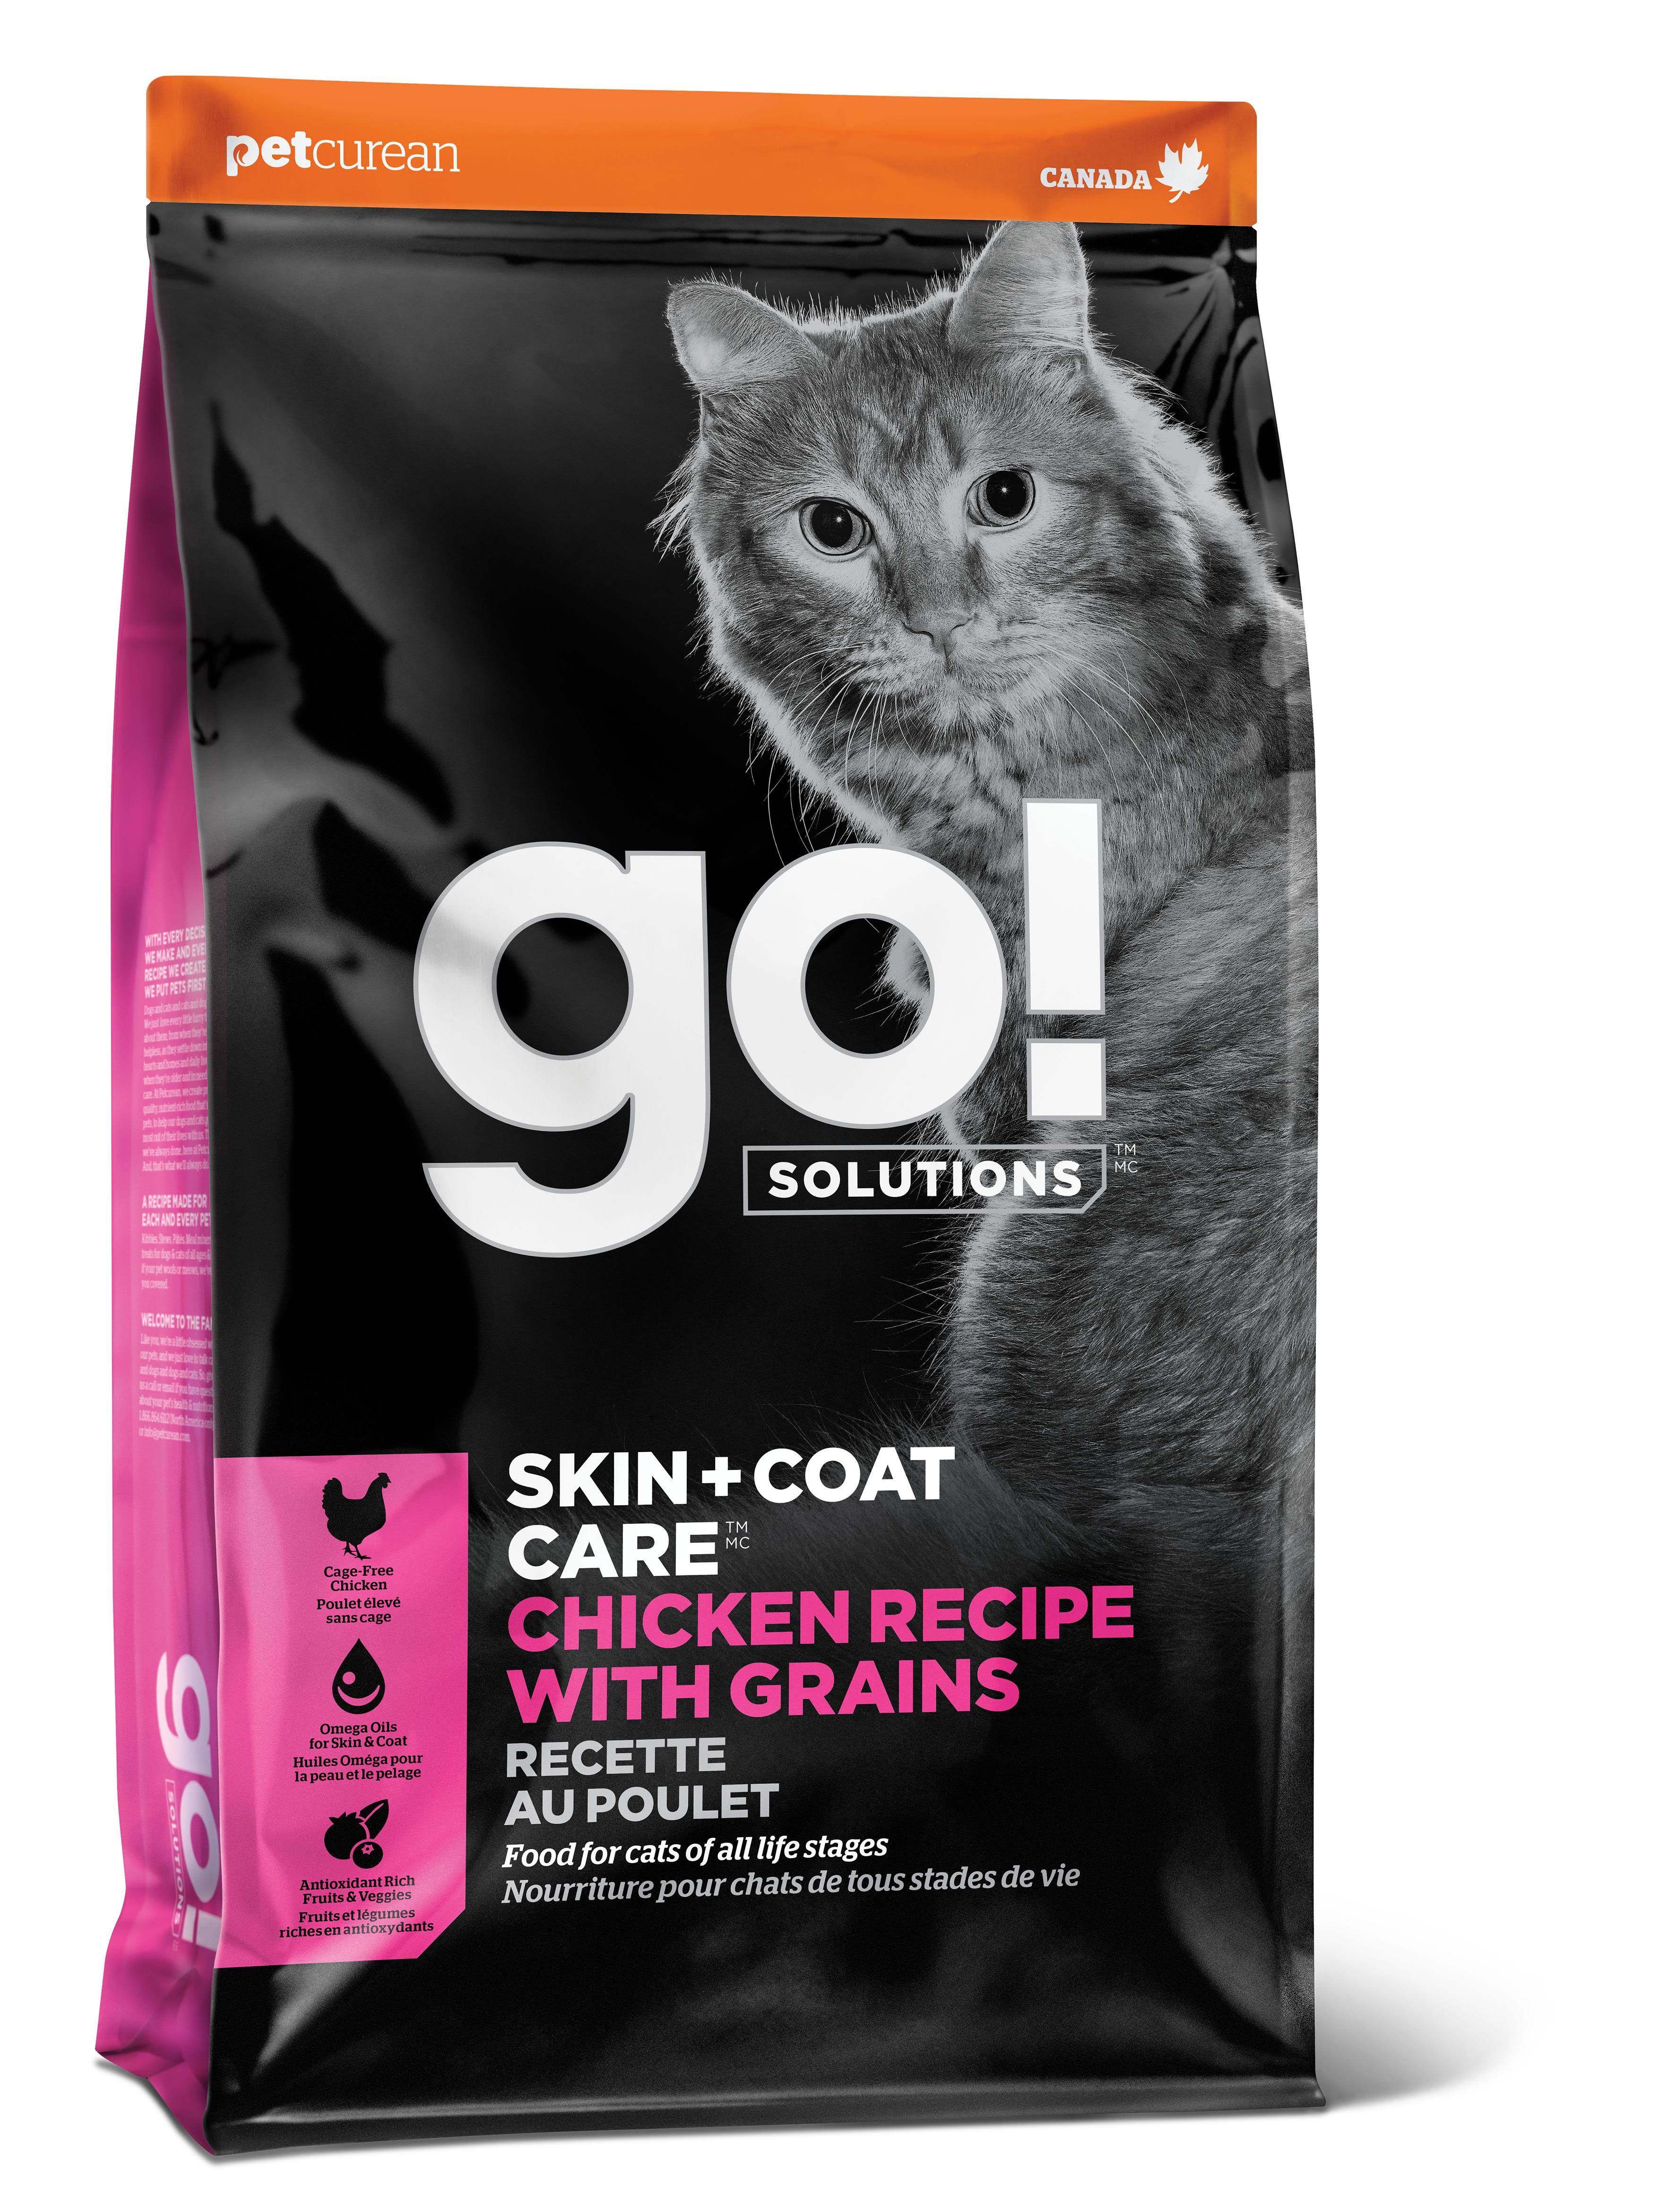 Go! Solutions Skin + Coat Care Chicken Dry Cat Food, 16-lb